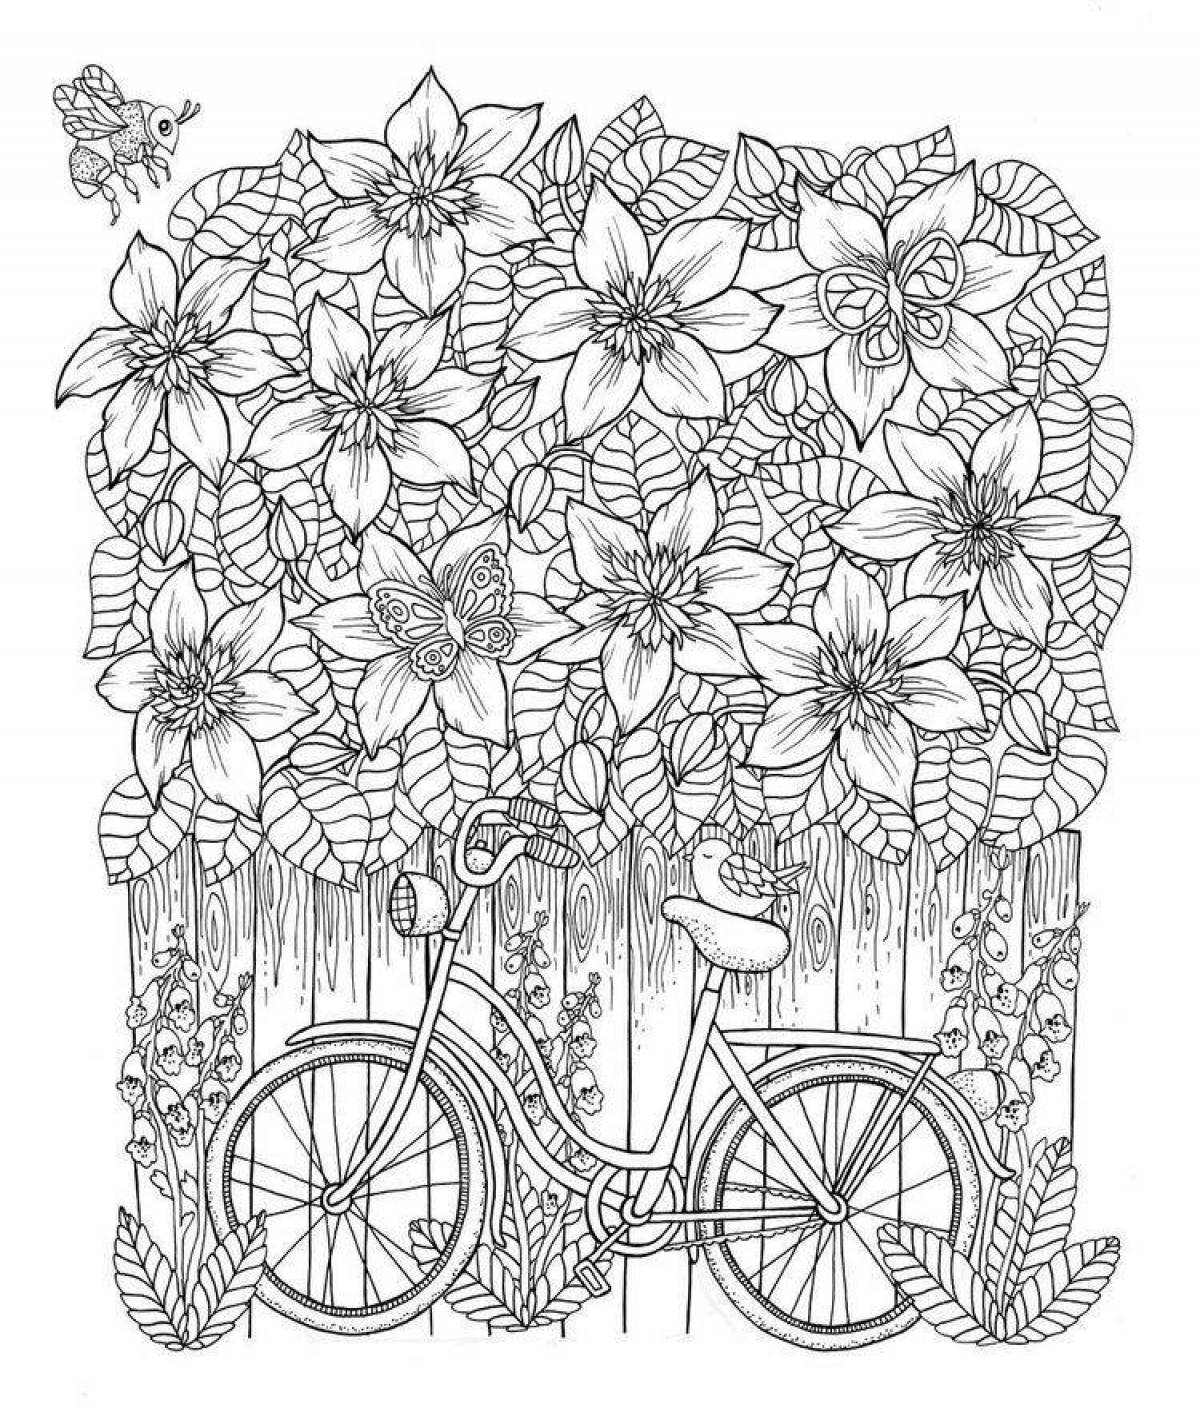 Stimulating anti-stress coloring book for adults